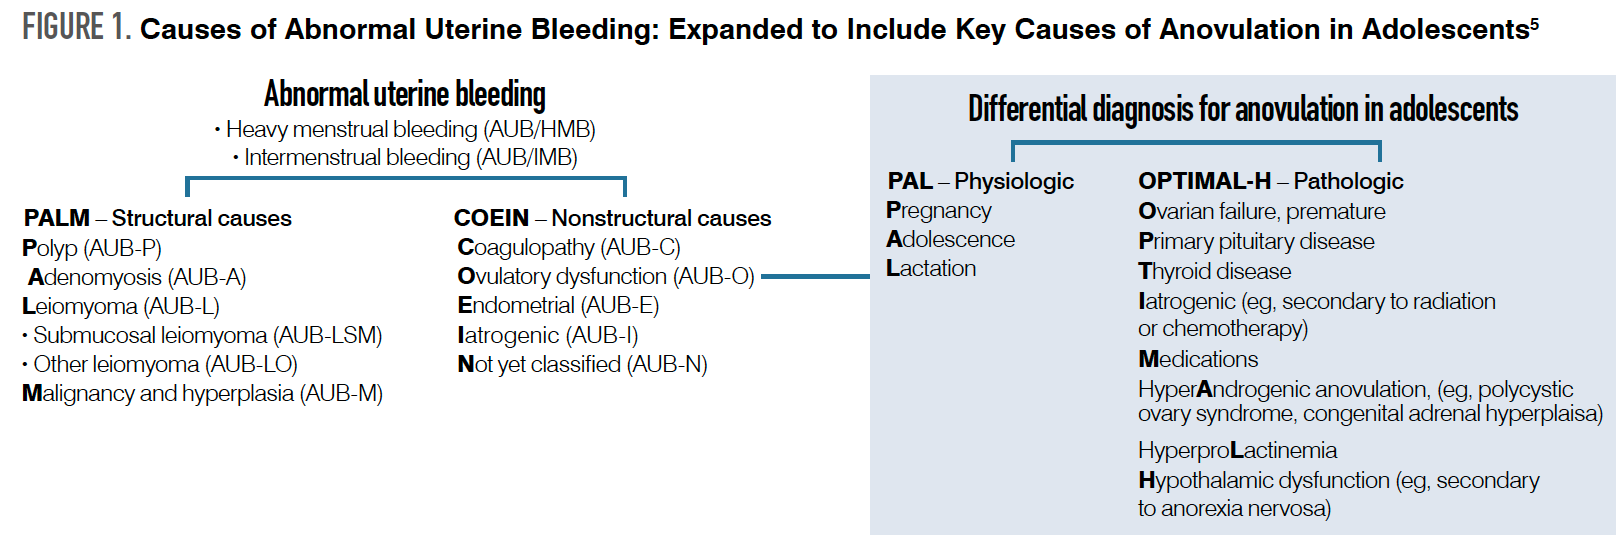 Figure 1. Causes of Abnormal Uterine Bleeding: Expanded to Include Key Causes of Anovulation in Adolescents